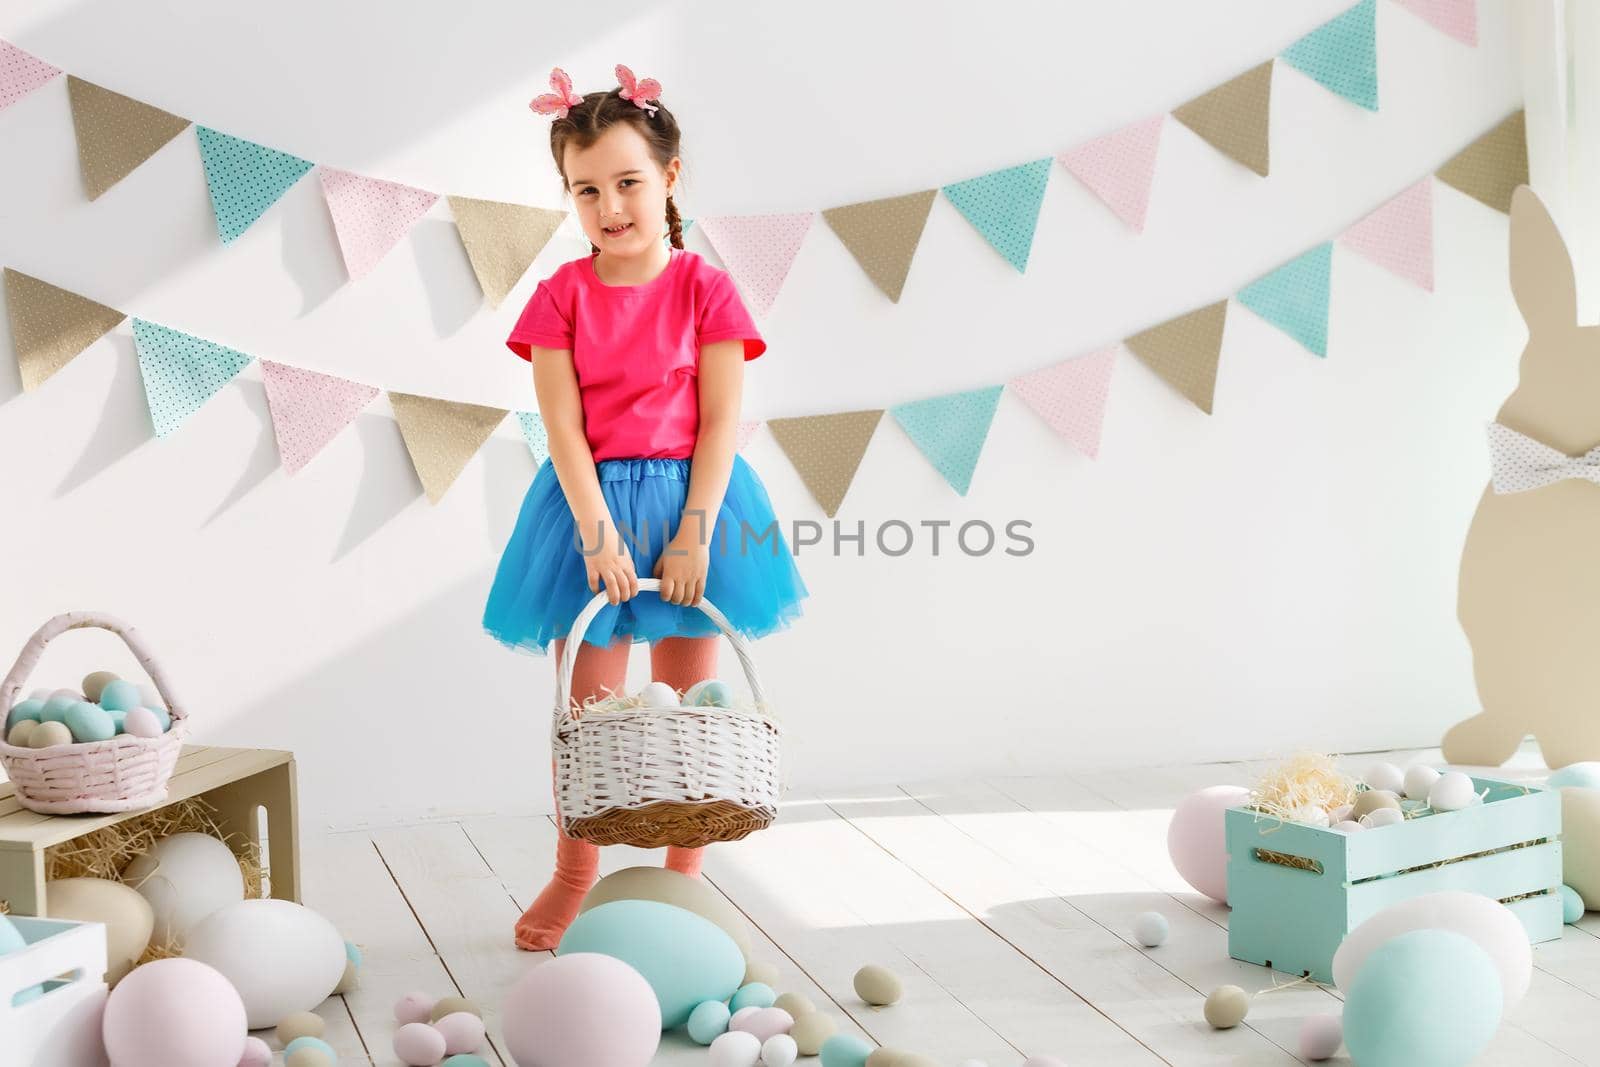 Getting ready to Easter. Lovely little girl holding an Easter egg and smiling with decoration in the background